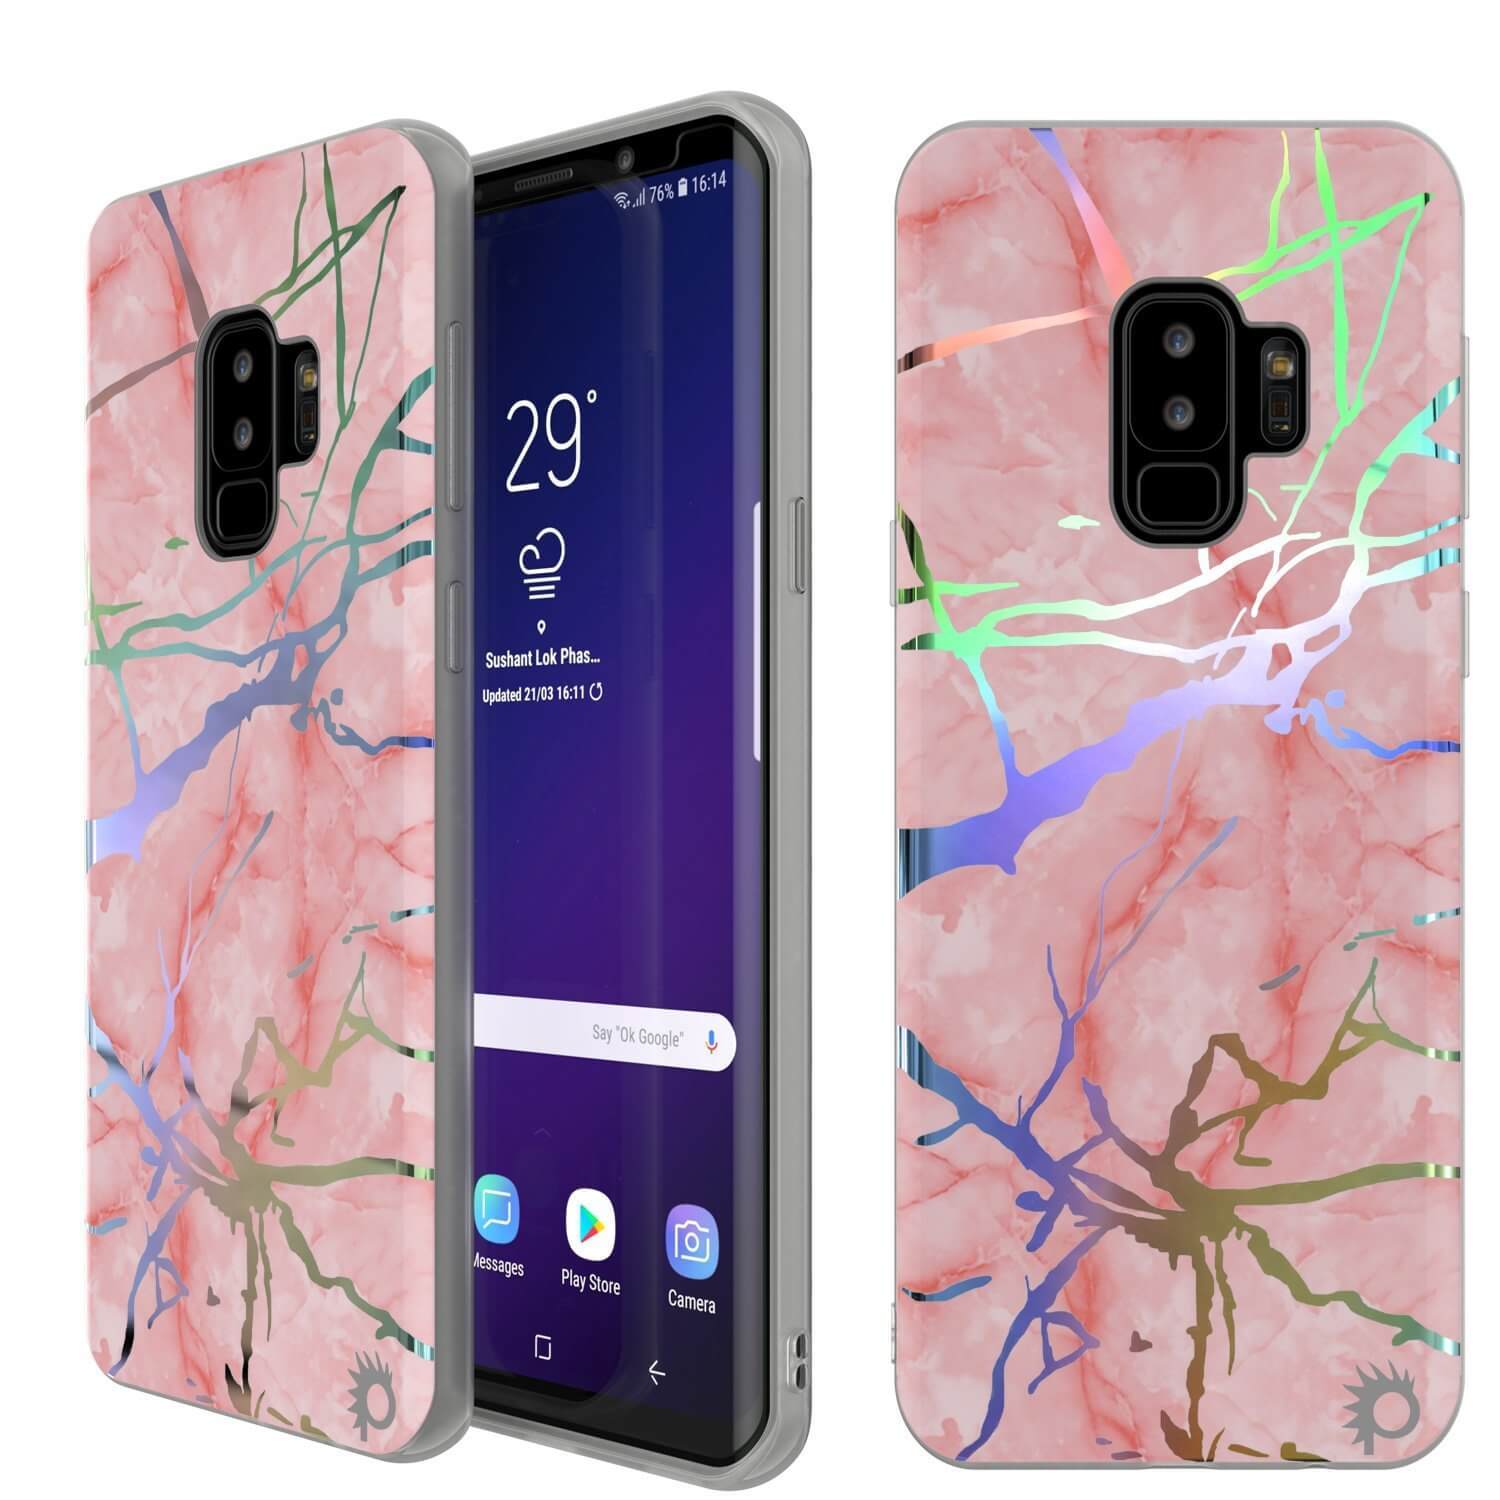 Punkcase Galaxy S9+ Marble Case, Protective Full Body Cover W/PunkShield Screen Protector (Rose Mirage)